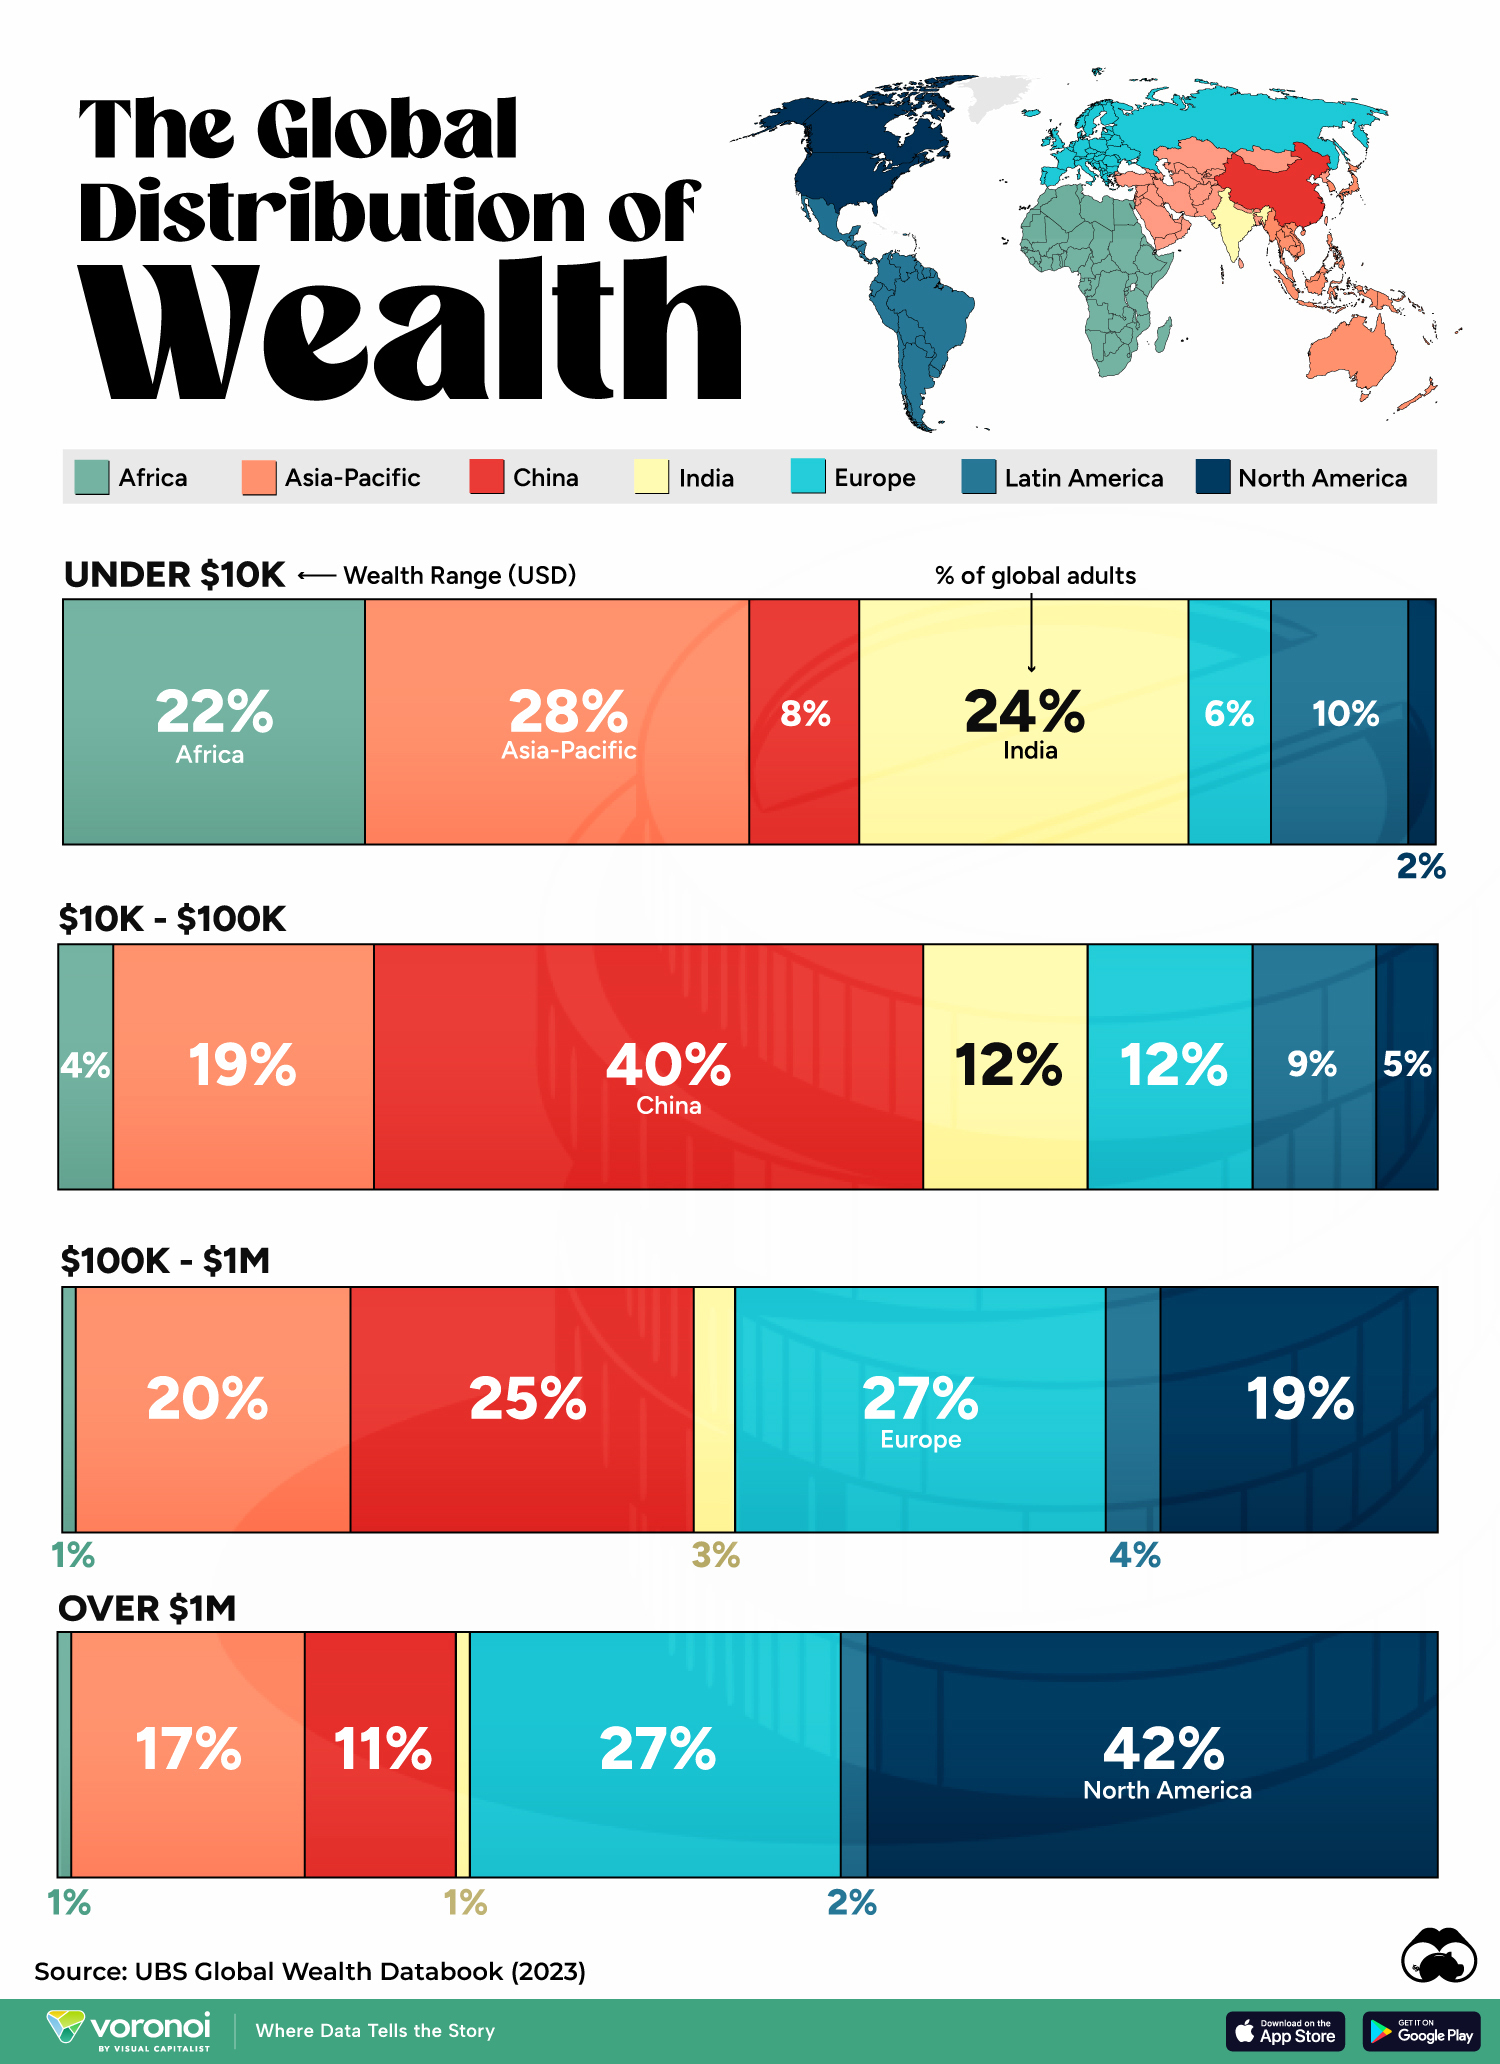 Visualizing the Global Distribution of Wealth